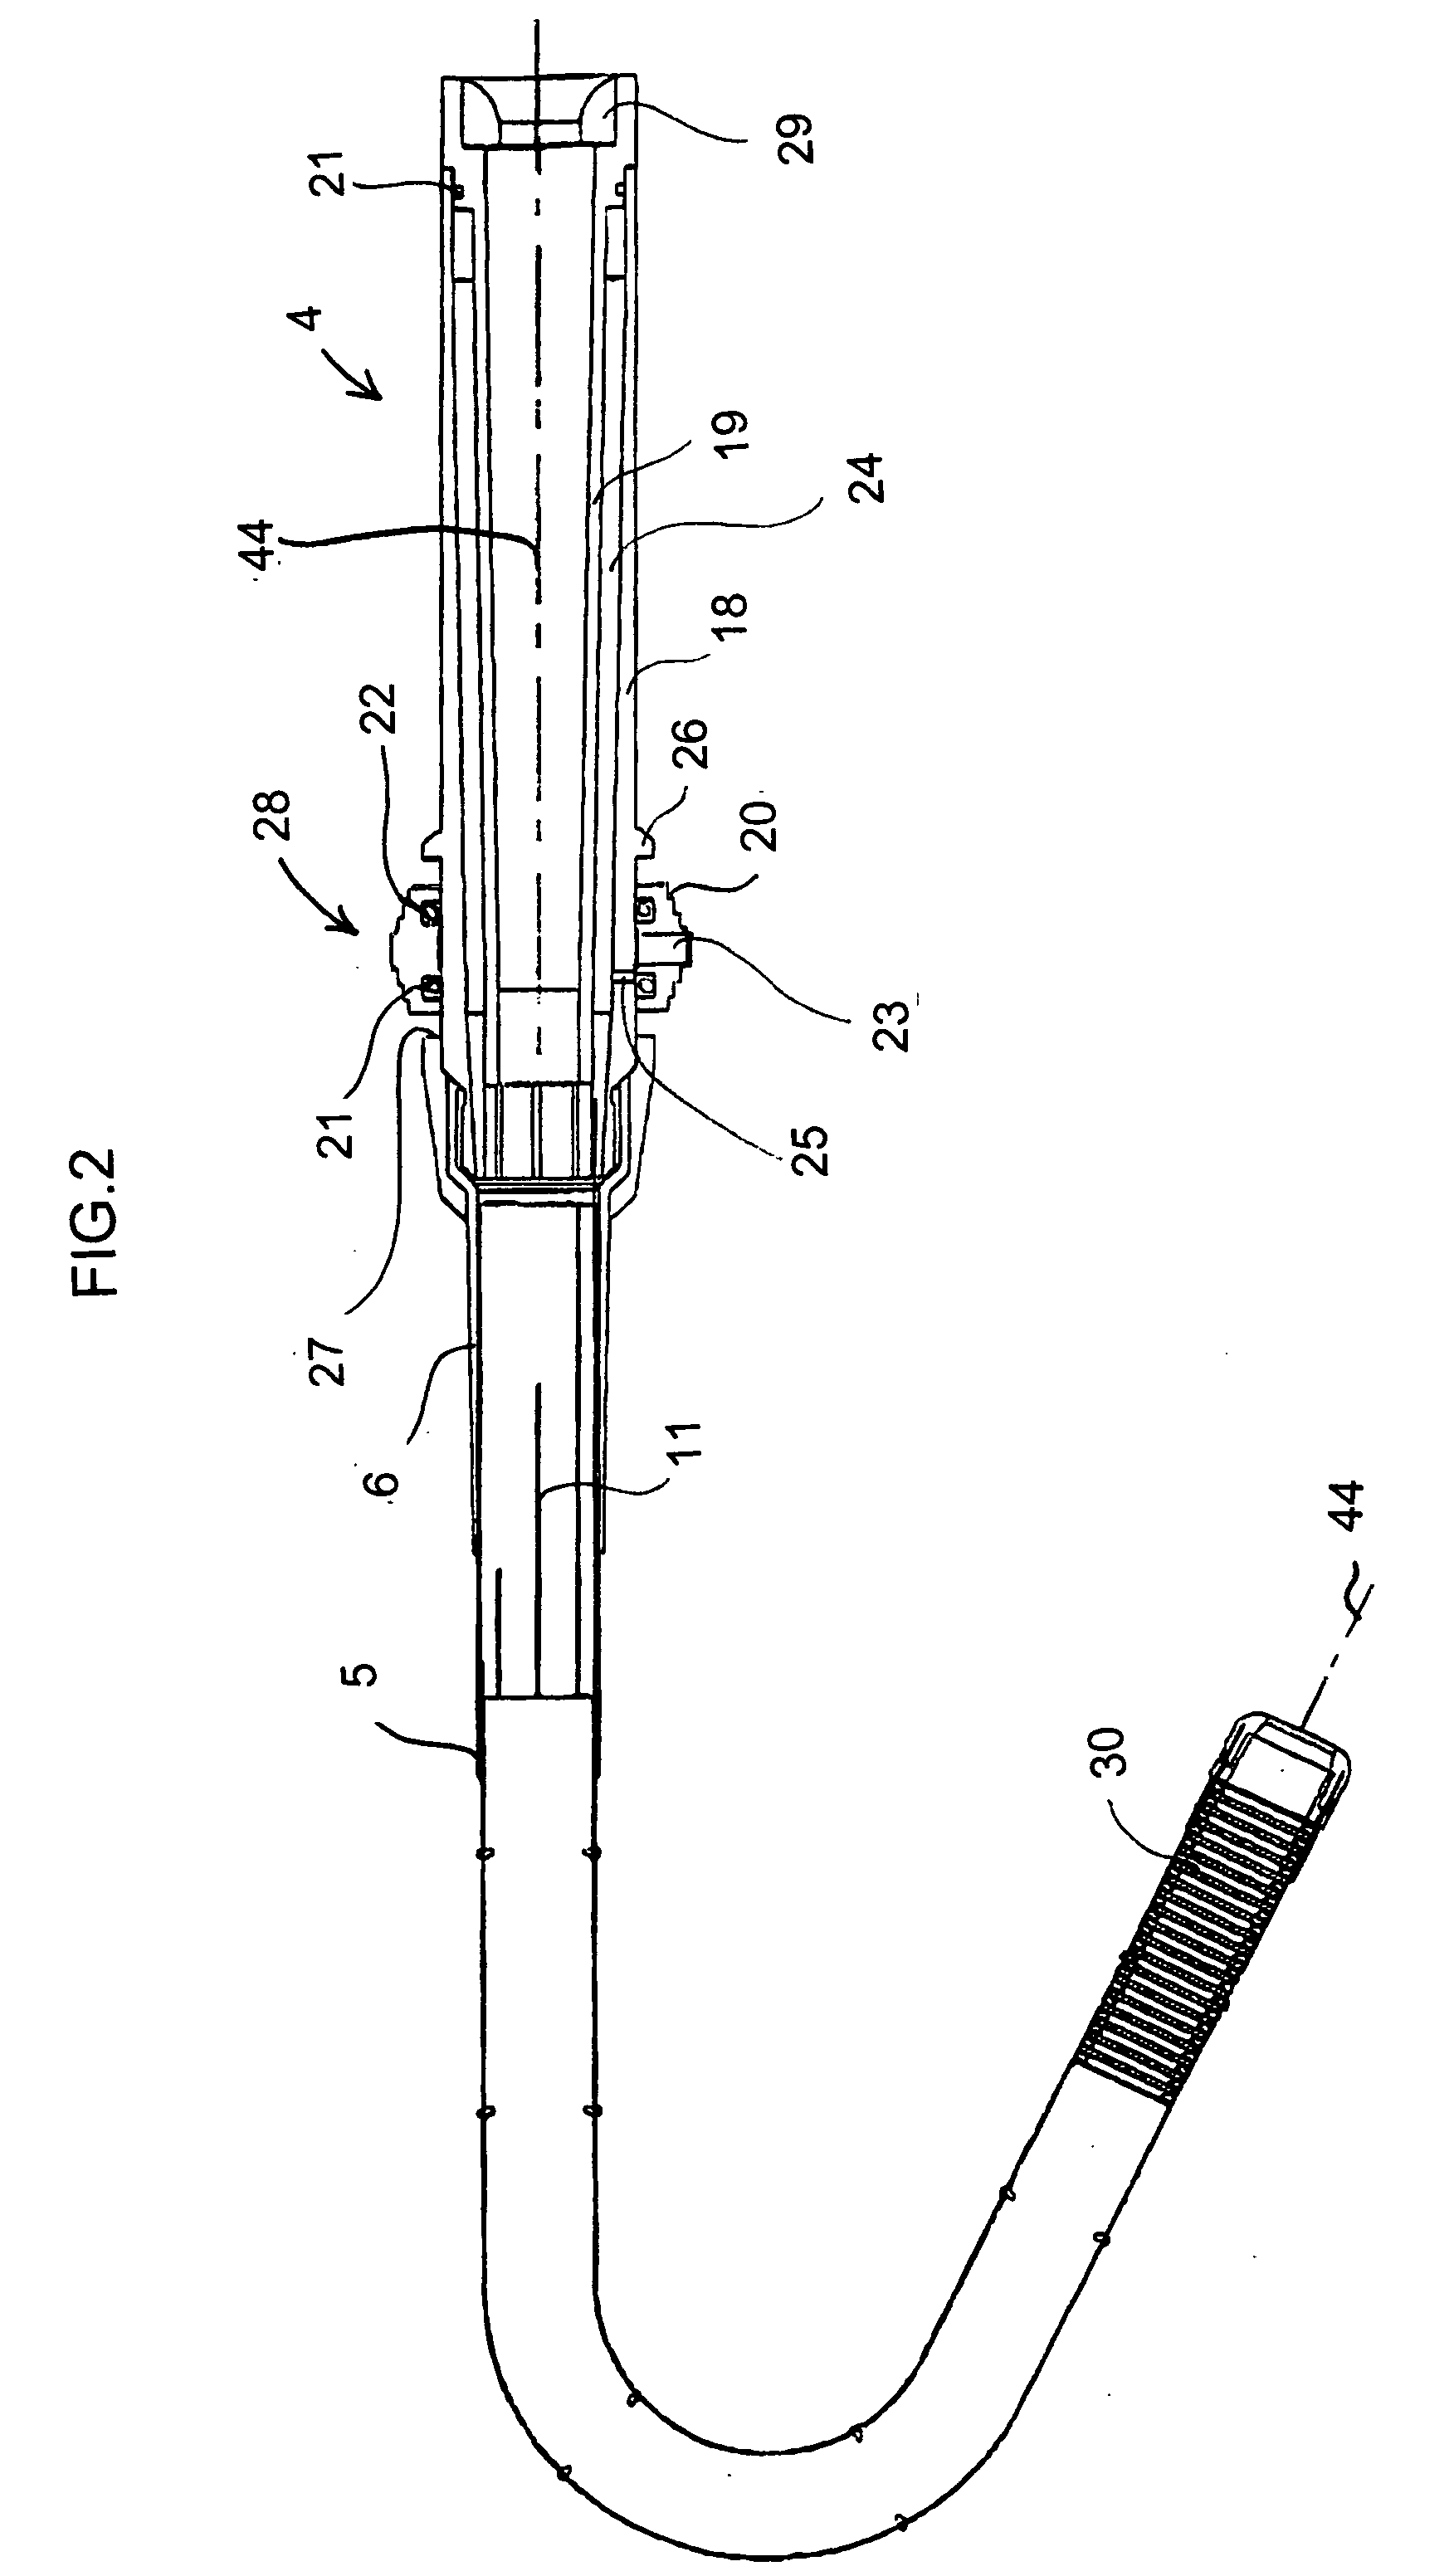 Torque-transmitting, variably-flexible, corrugated insertion device and method for transmitting torque and variably flexing a corrugated insertion device